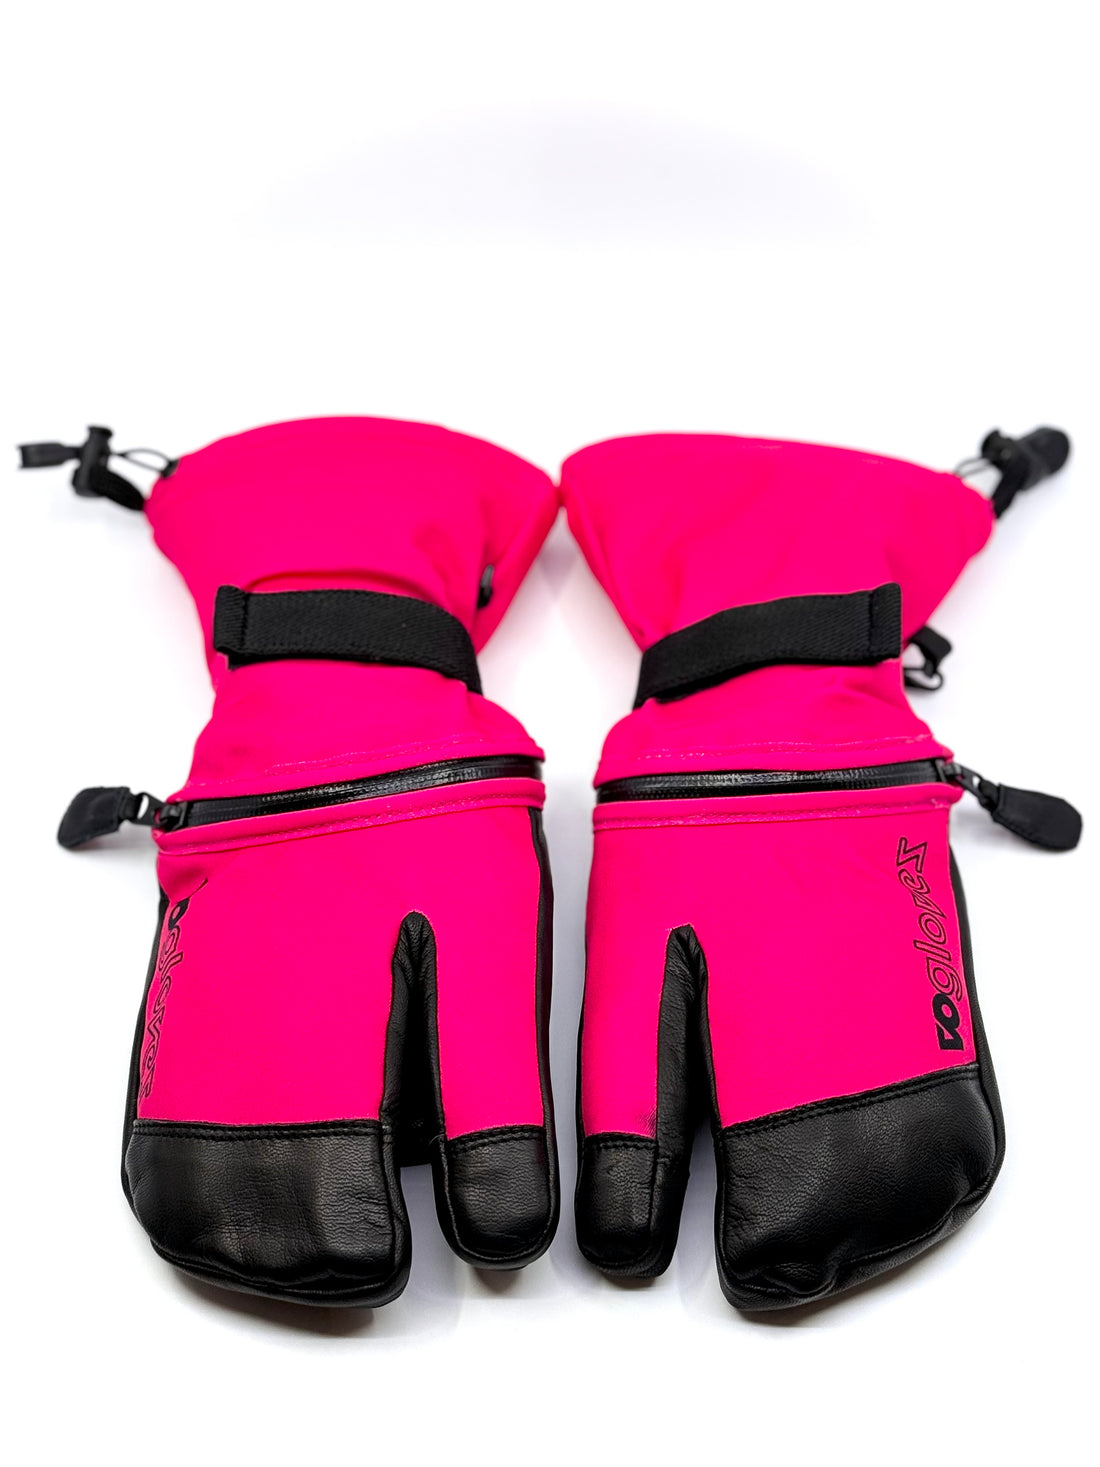 NEW! HOT PINK TRIGGER MITTS